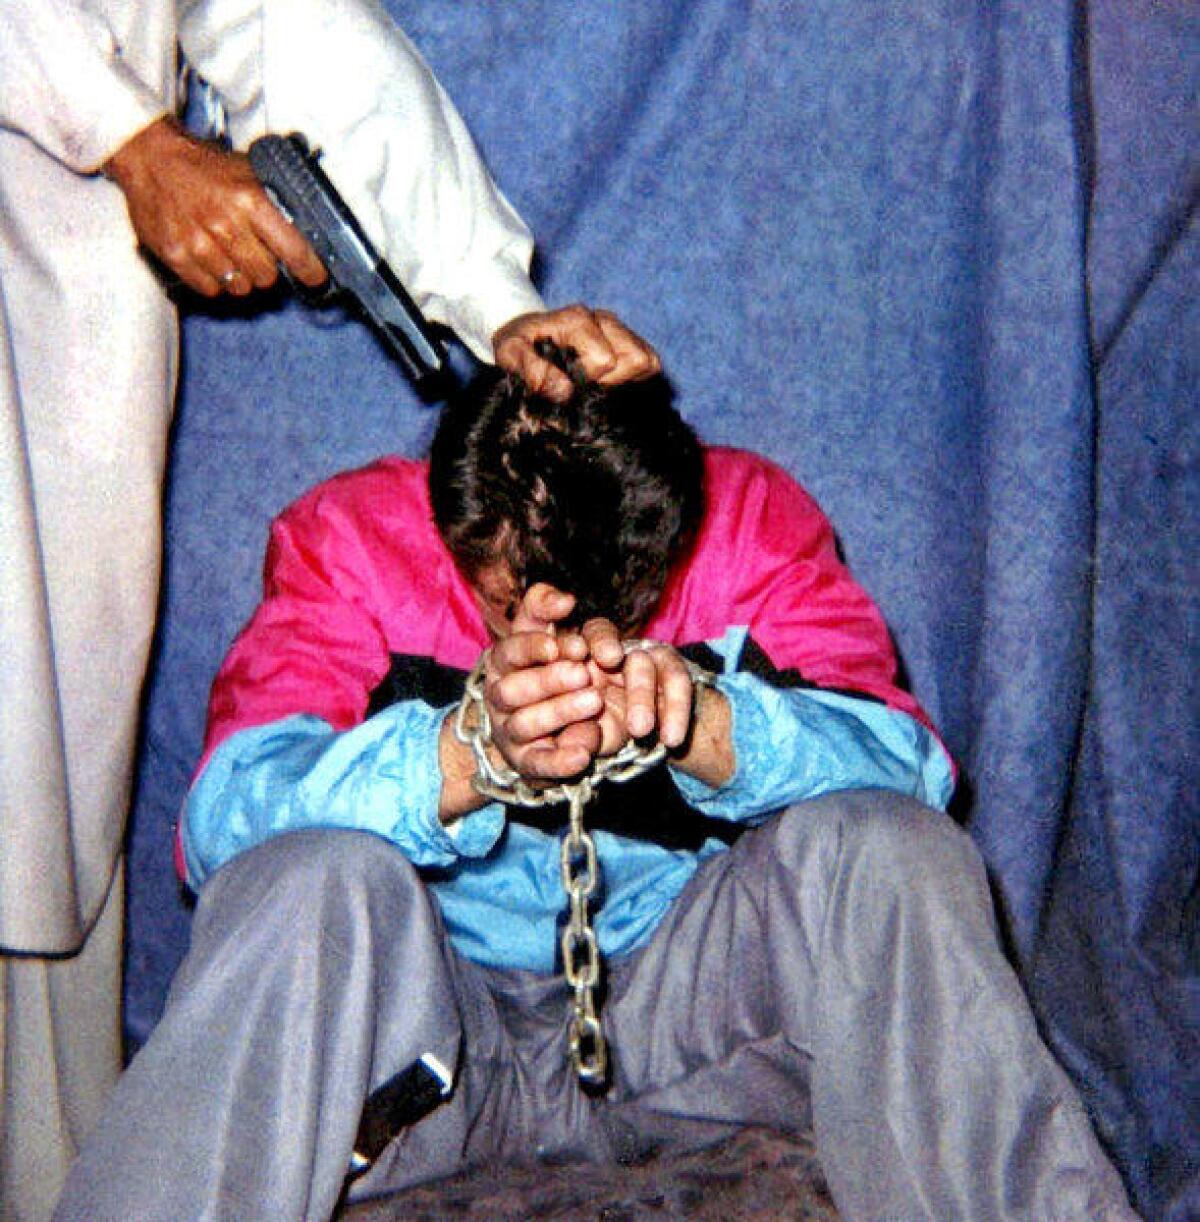 Wall Street Journal reporter Daniel Pearl is seen in this picture sent to news media organizations by his kidnappers. Pearl was abducted in Karachi, Pakistan, in January 2002 and later killed.